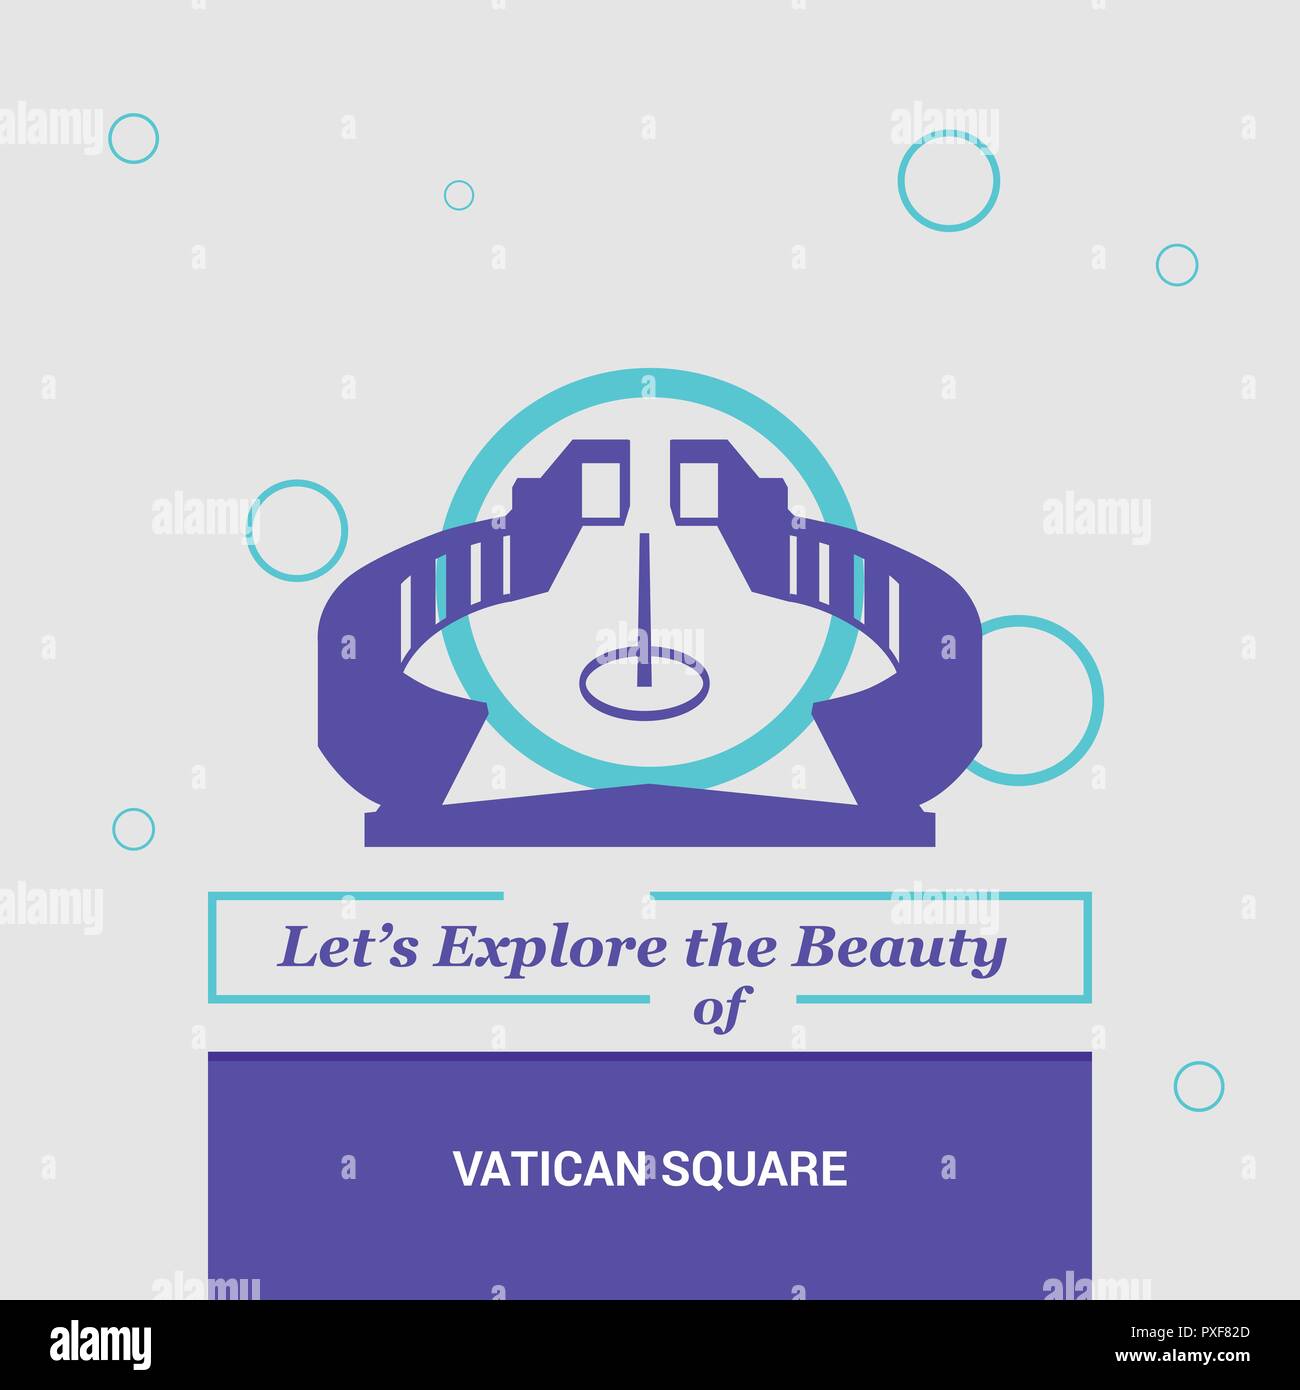 Let's Explore the beauty of Vatican Square, Vatican City National Landmarks Stock Vector